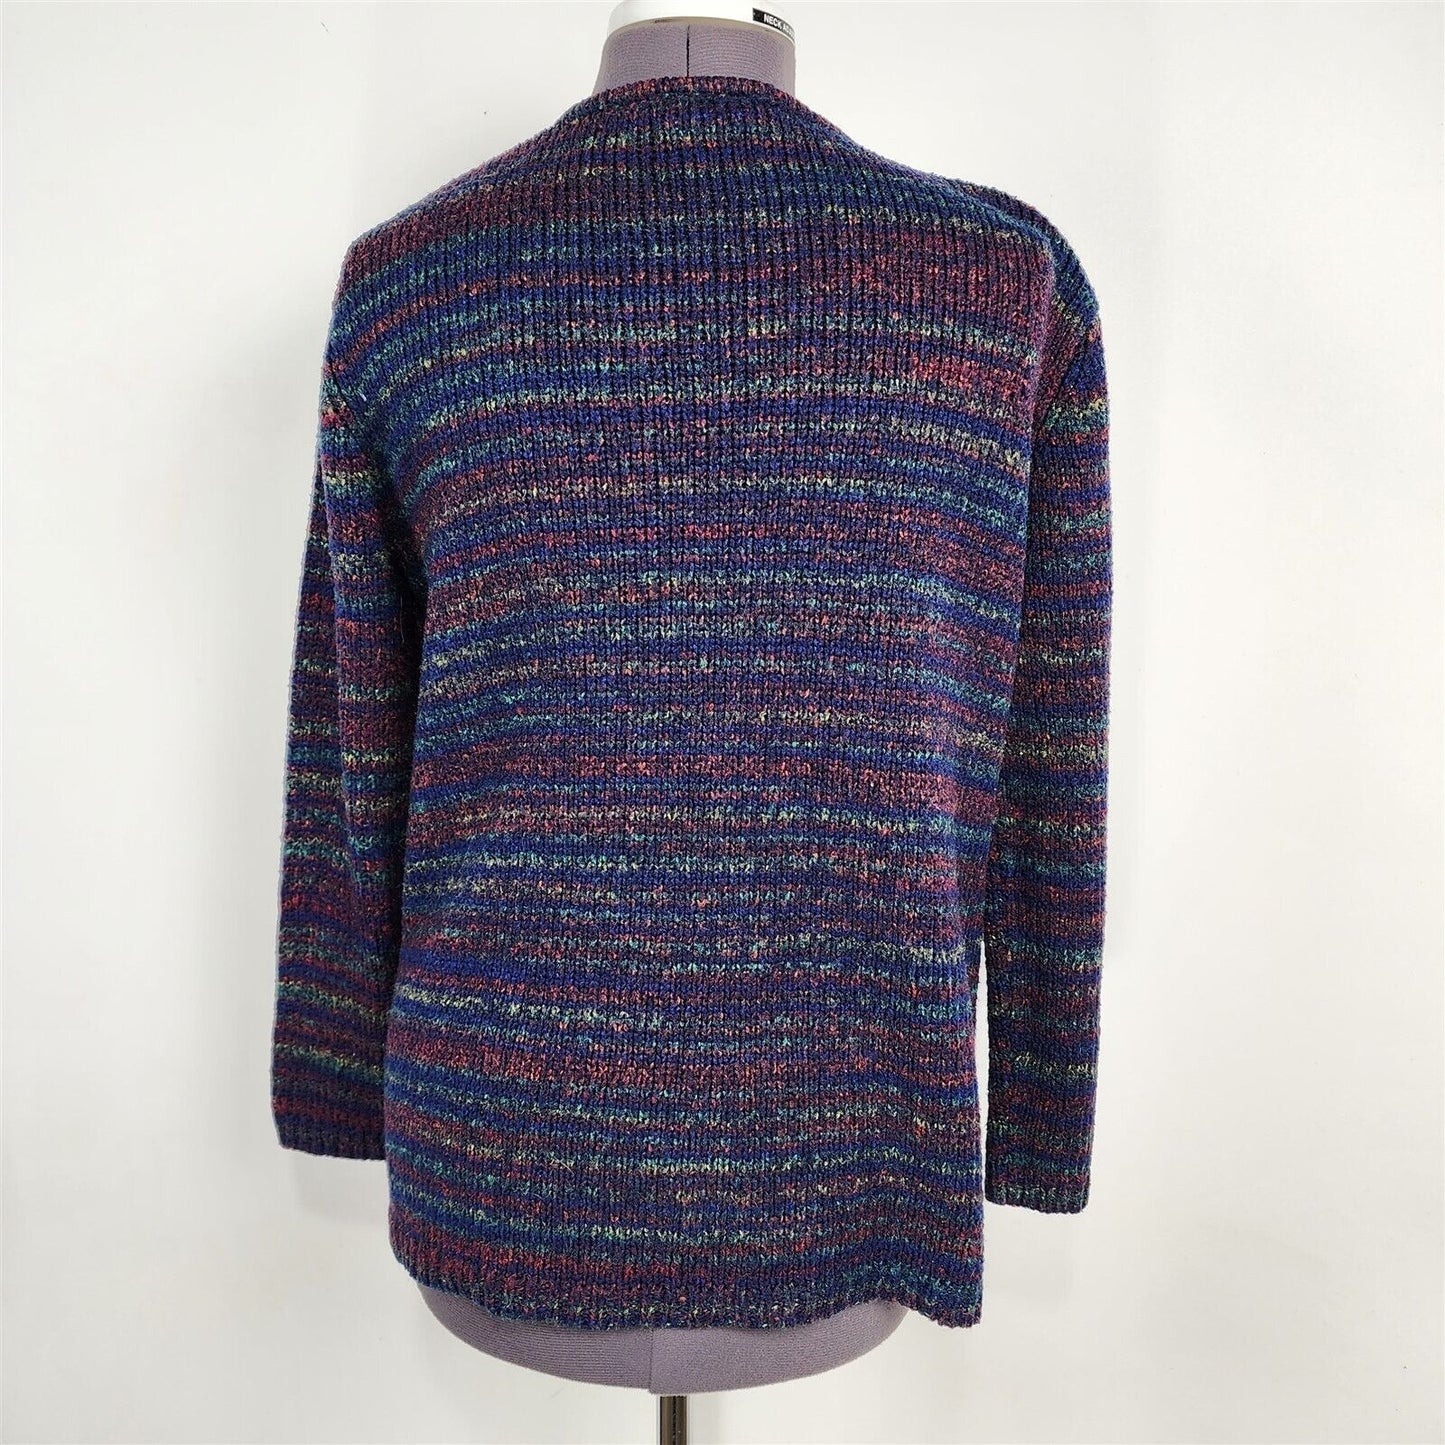 Vintage Colorful Cable Knit V-Neck Sweater Womens M